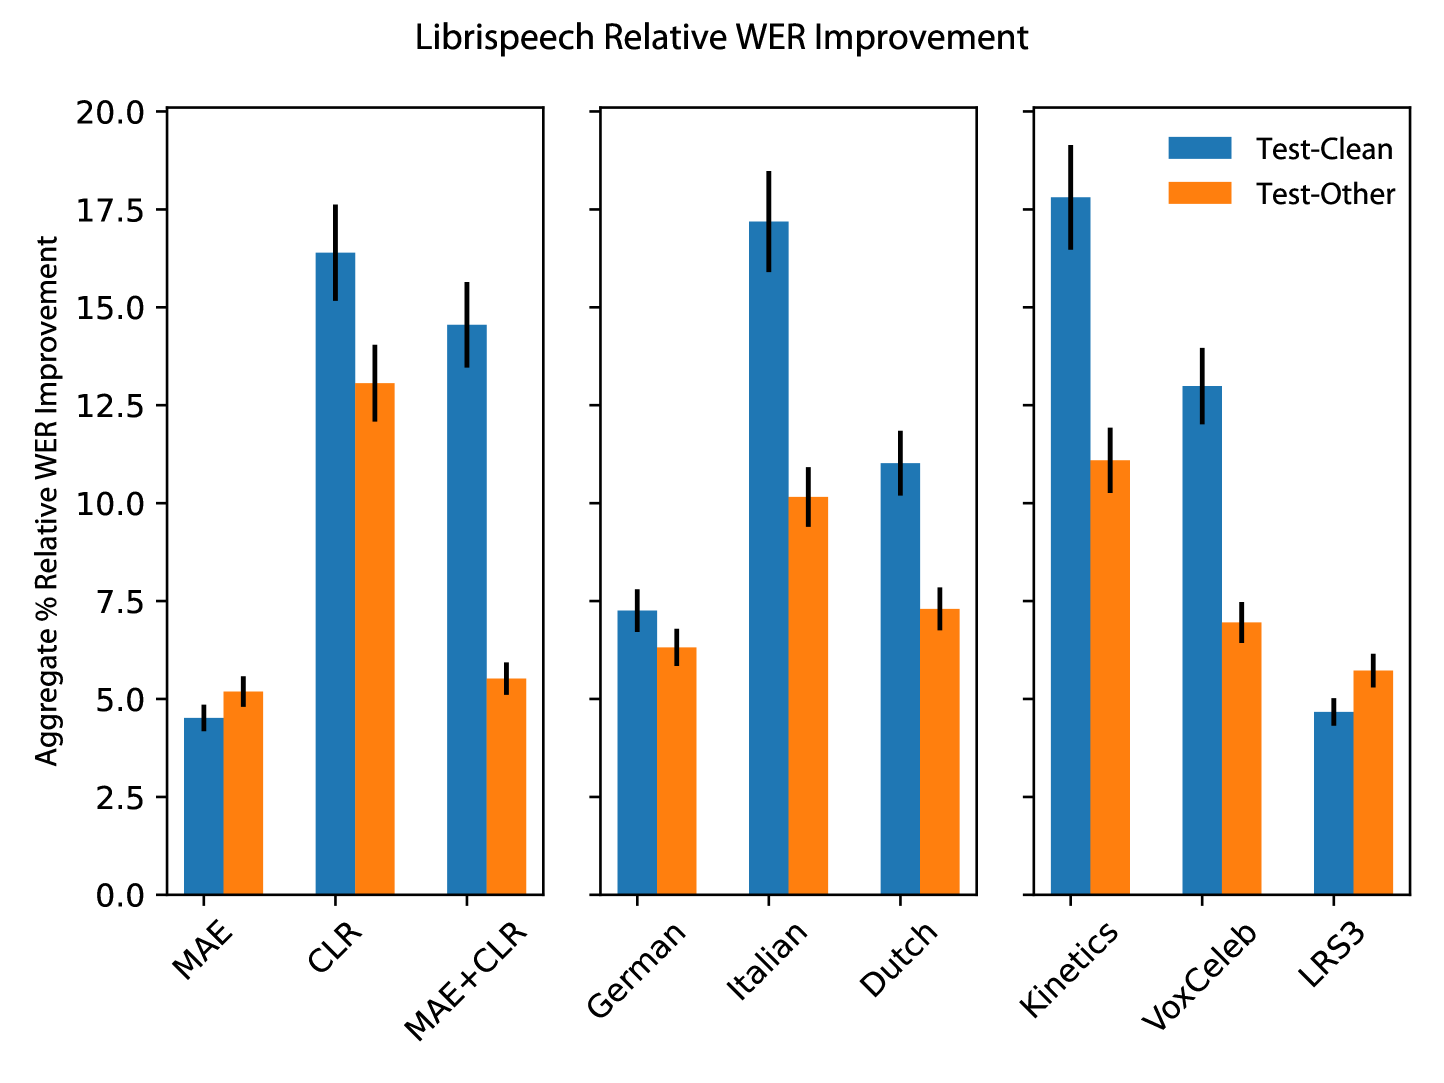 Figure 3: Average relative WER improvement on the Librispeech test-clean and test-other datasets with mid-training to show the effect of pre-training methods (left), mid-training translation pairs (center), and pre-training datasets (right). Translation mid-training improves upon CLR pre-training the most as it aligns its features for the local information required for ASR. Among the translation languages, Italian provides the best improvement, suggesting a complimentary language to English gains the most compared to languages that shares its roots with English. Models pre-trained on non-speech dataset Kinetics benefit the most from translation mid-training followed by noisy speech dataset Voxceleb2 and then clean speech dataset LRS3.